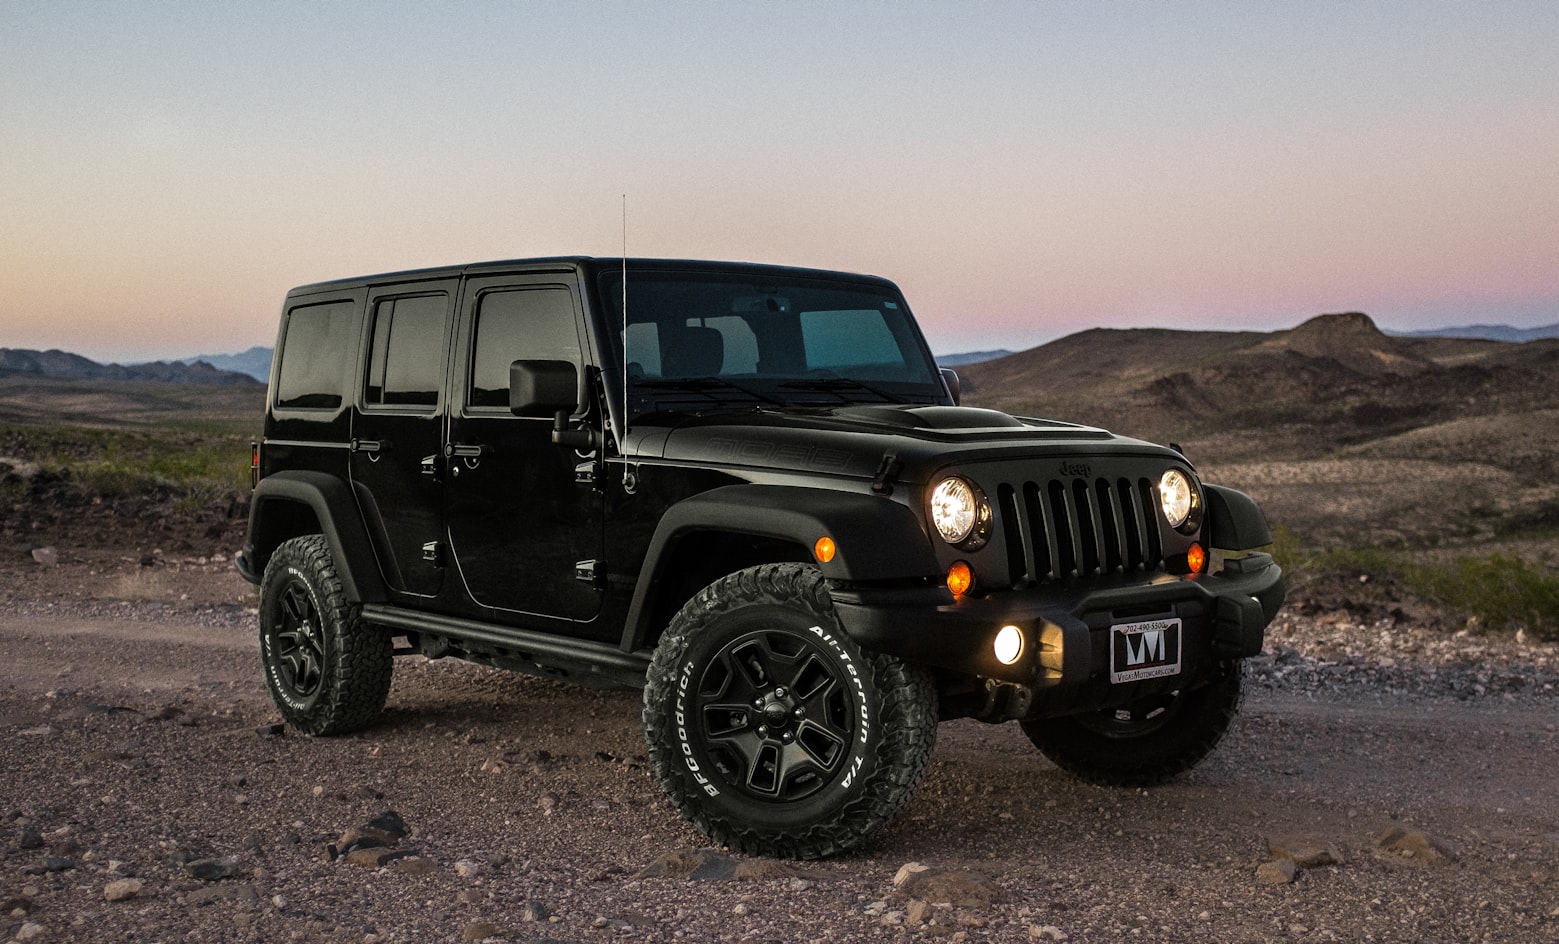 Top 10 Oil For Jeep Wrangler With Buying Guide